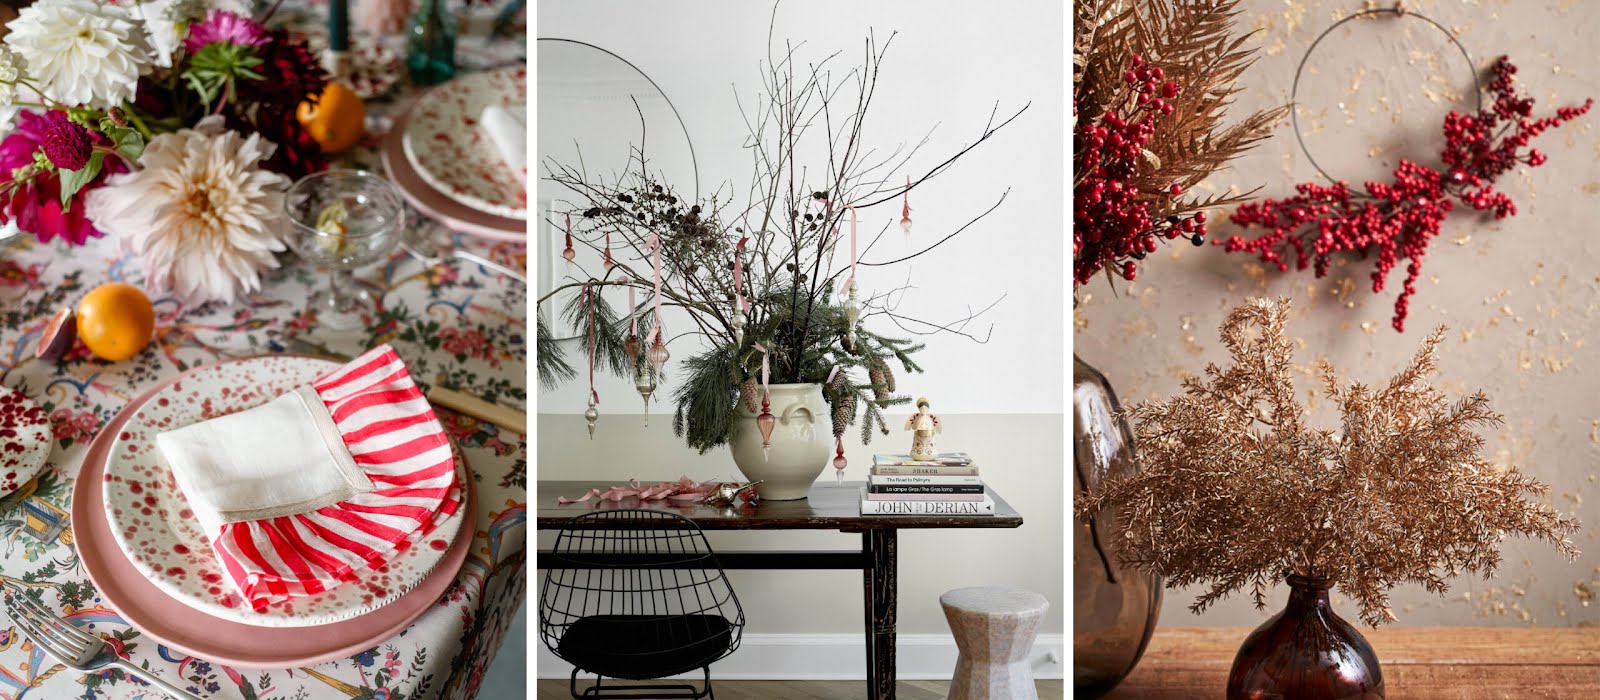 We asked 3 interiors mavens about their Christmas decorating style